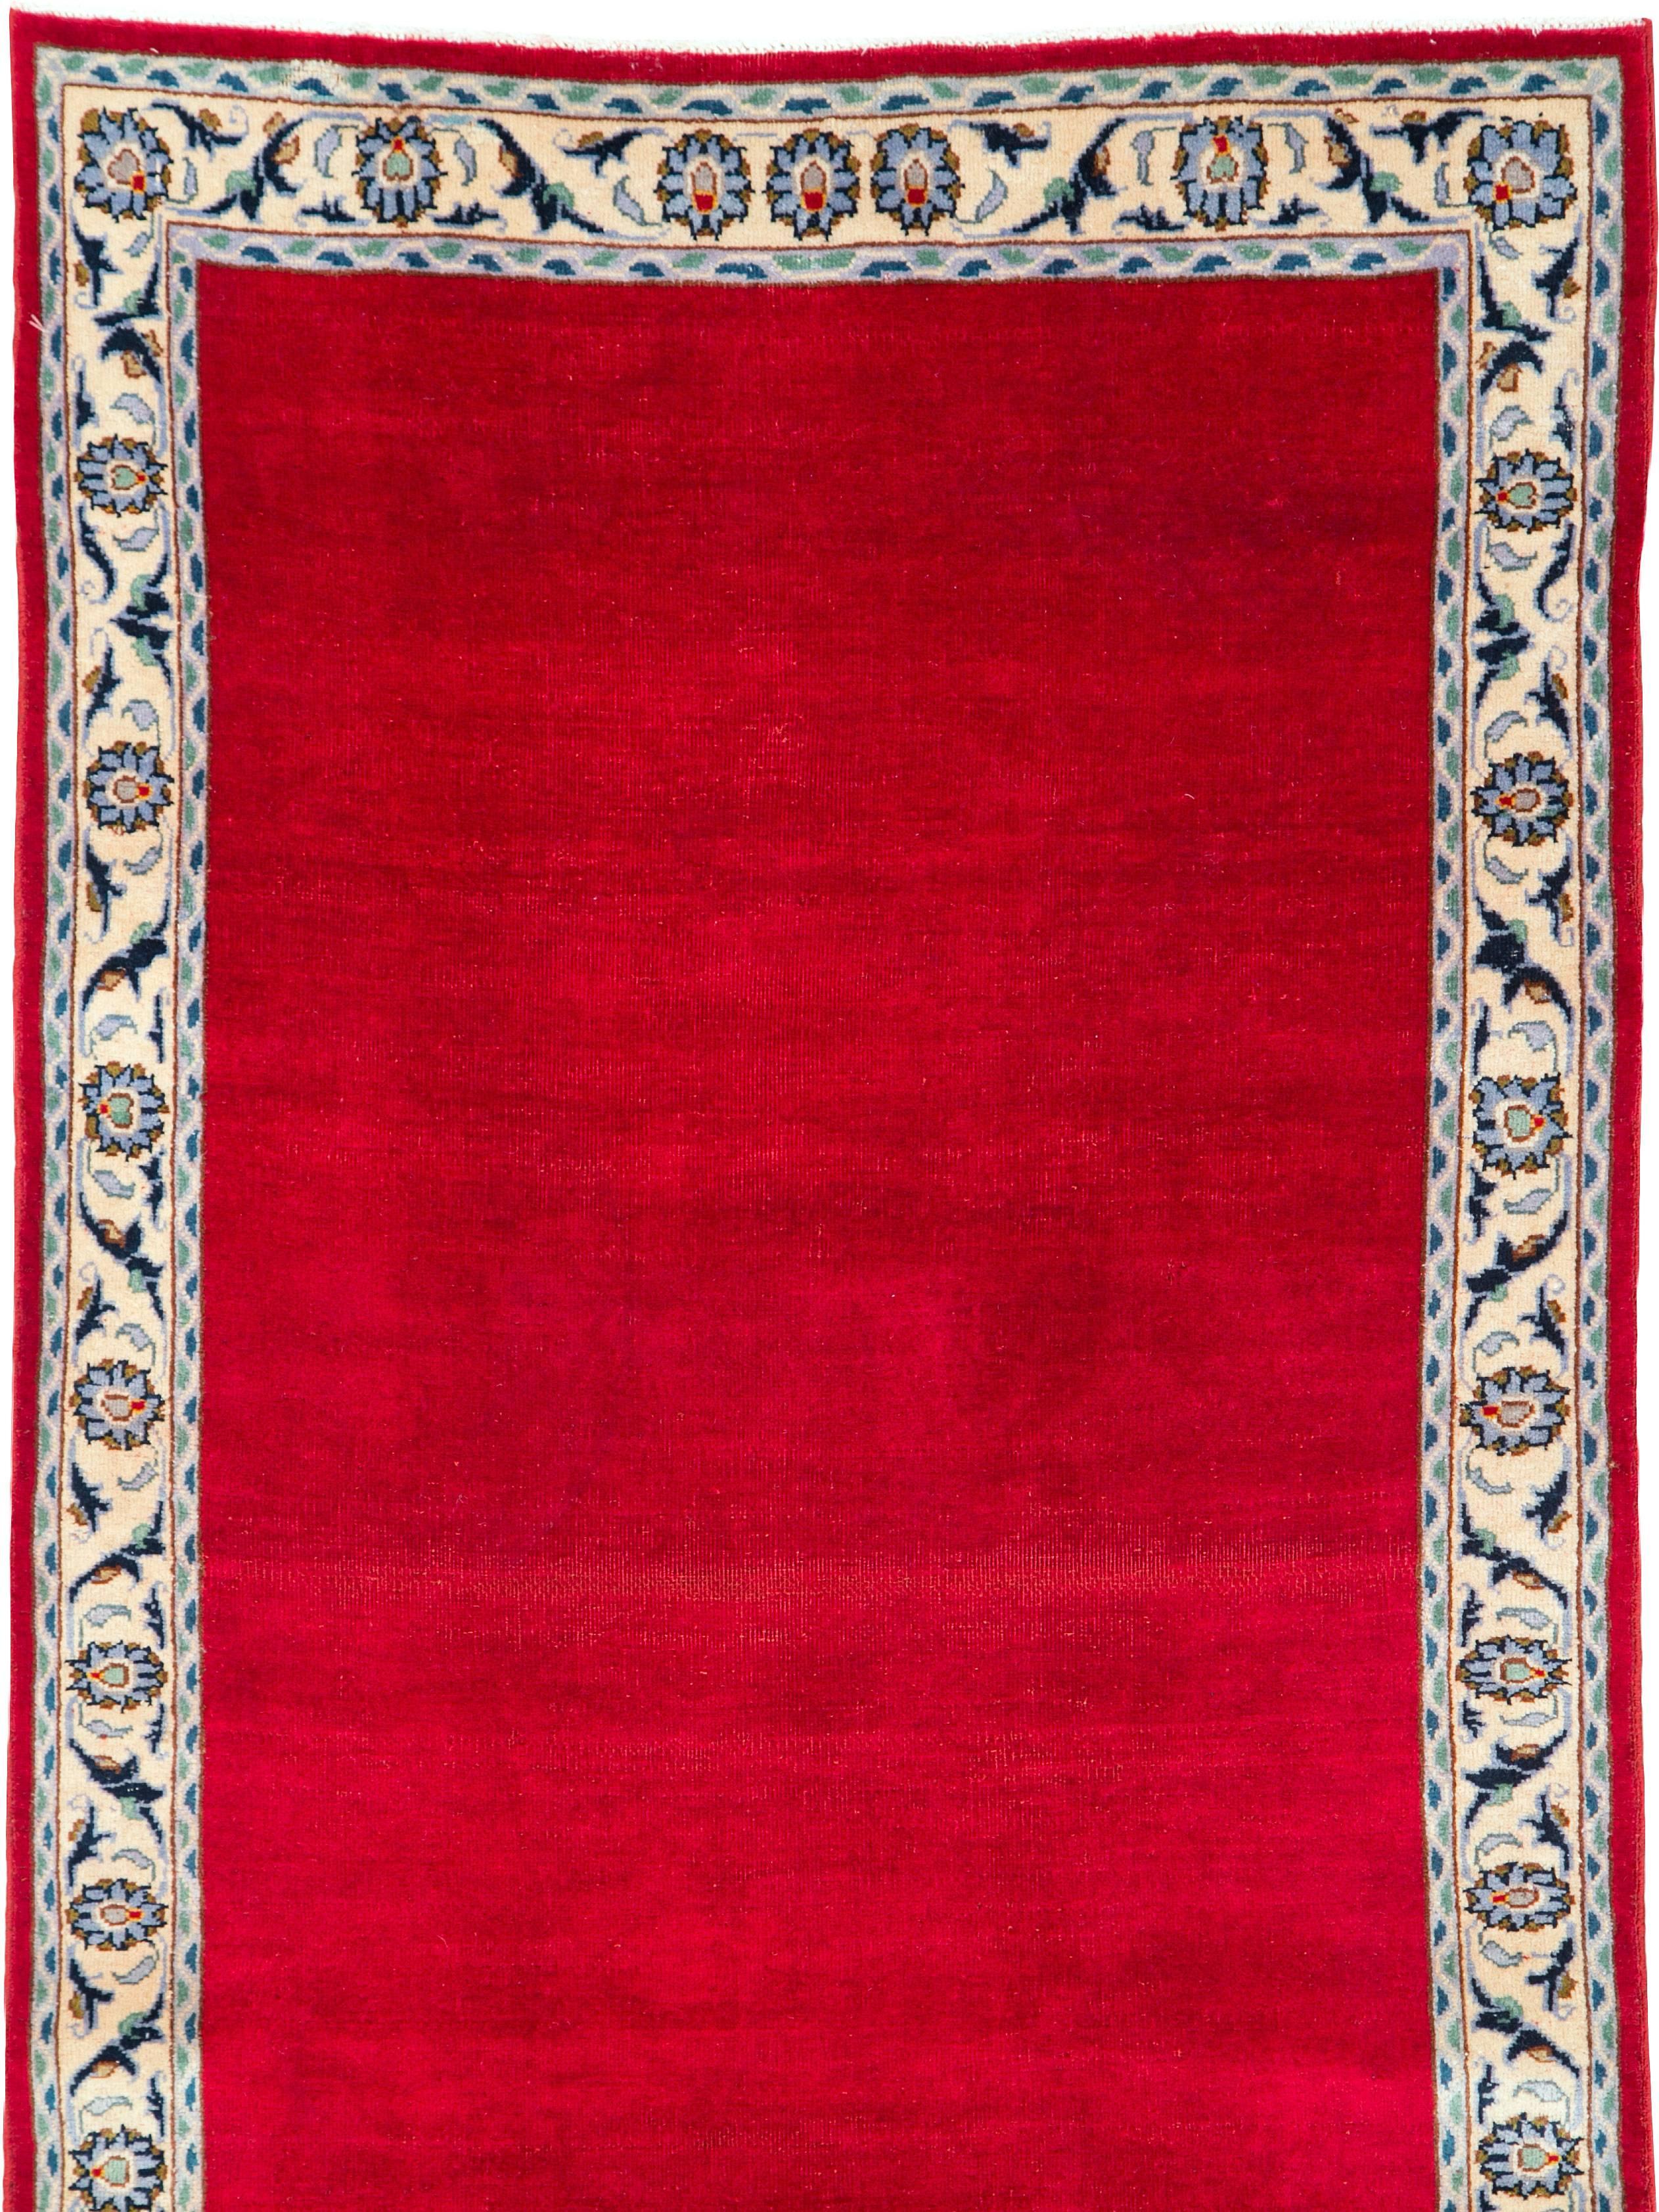 A vintage Persian Kashan modernist carpet from the mid-20th century.